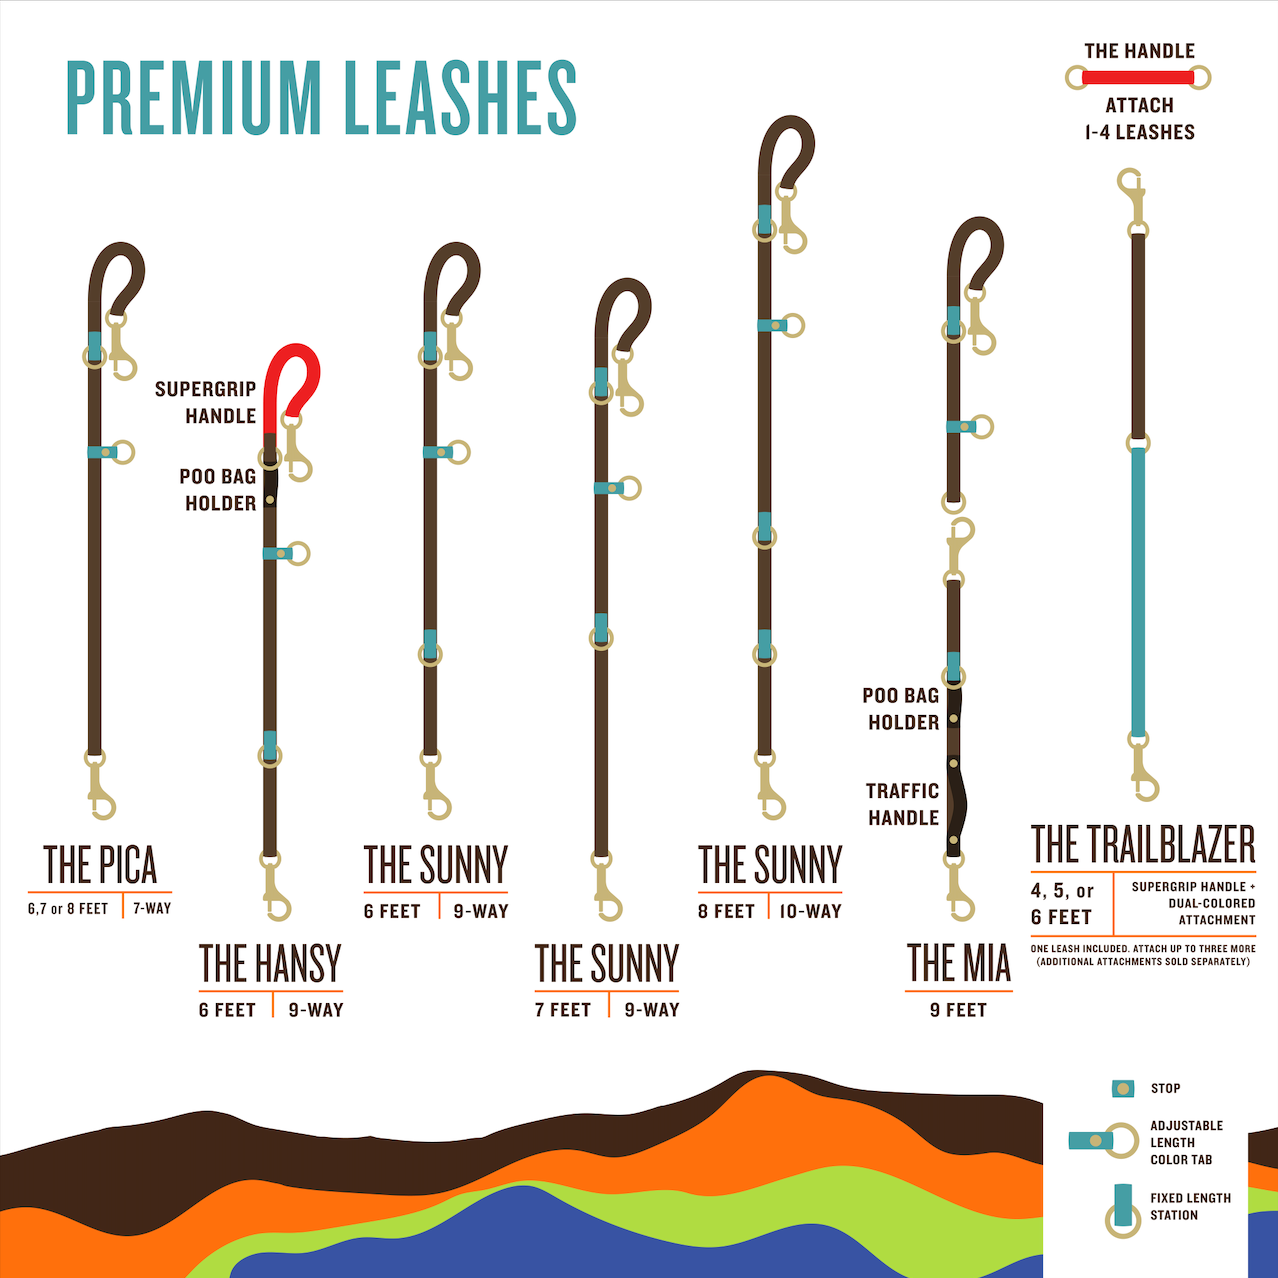 Discover the versatility of Trailblazing Tails: The Sunny multifunctional dog leashes with adjustable length options. Find premium Your Whole Dog leashes designed for any dog's need.